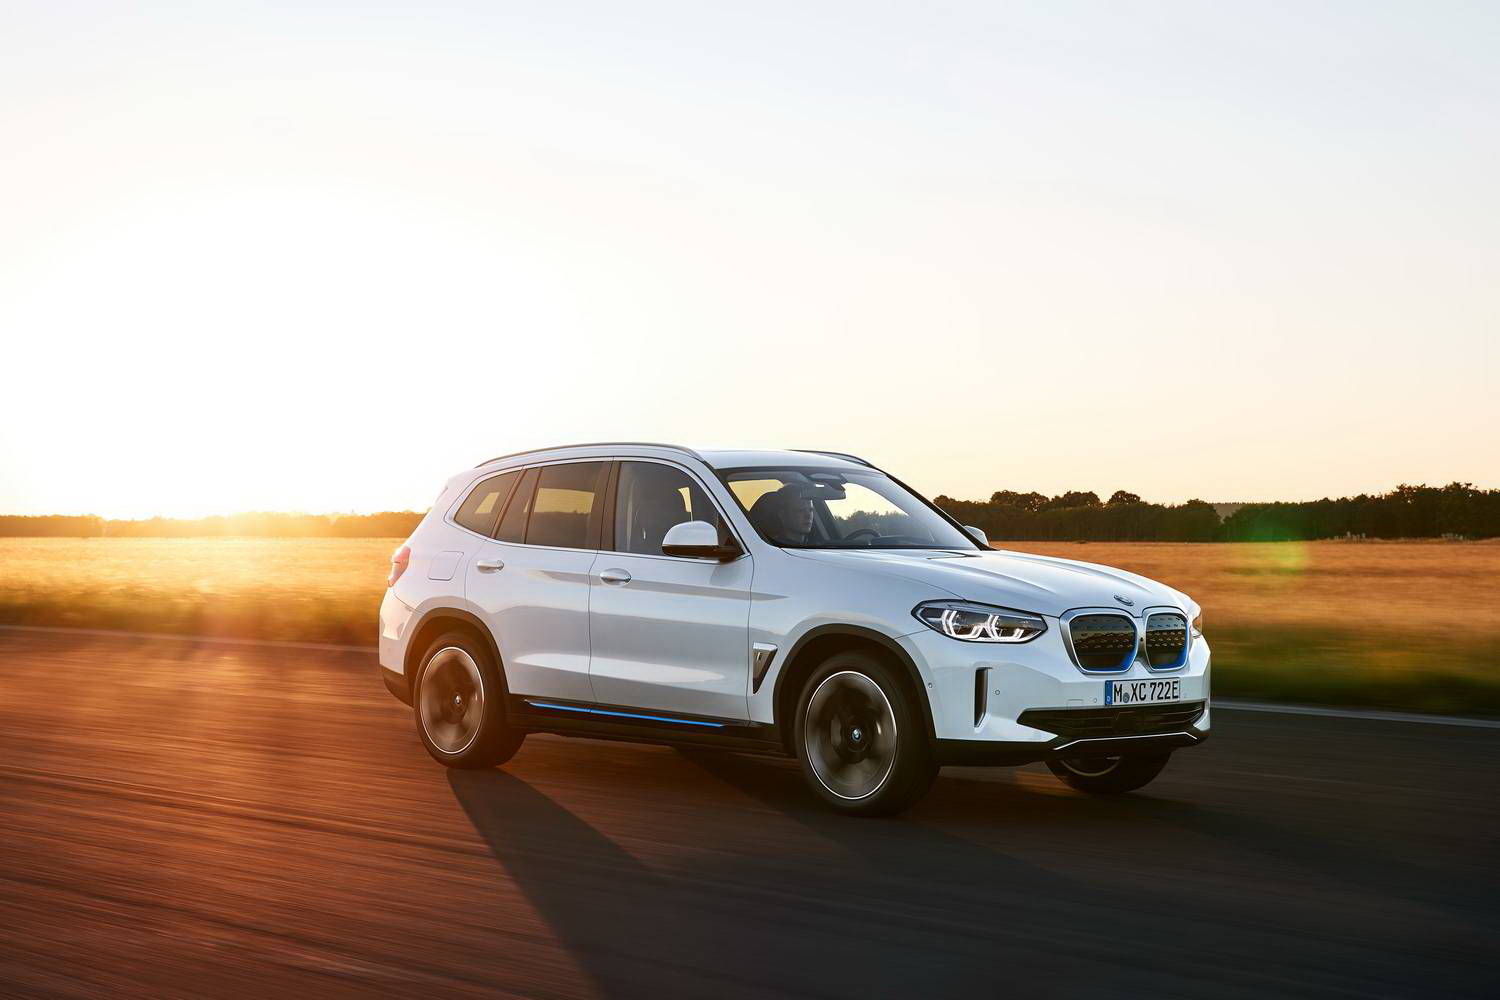 Electric BMW iX3 SUV unveiled in full